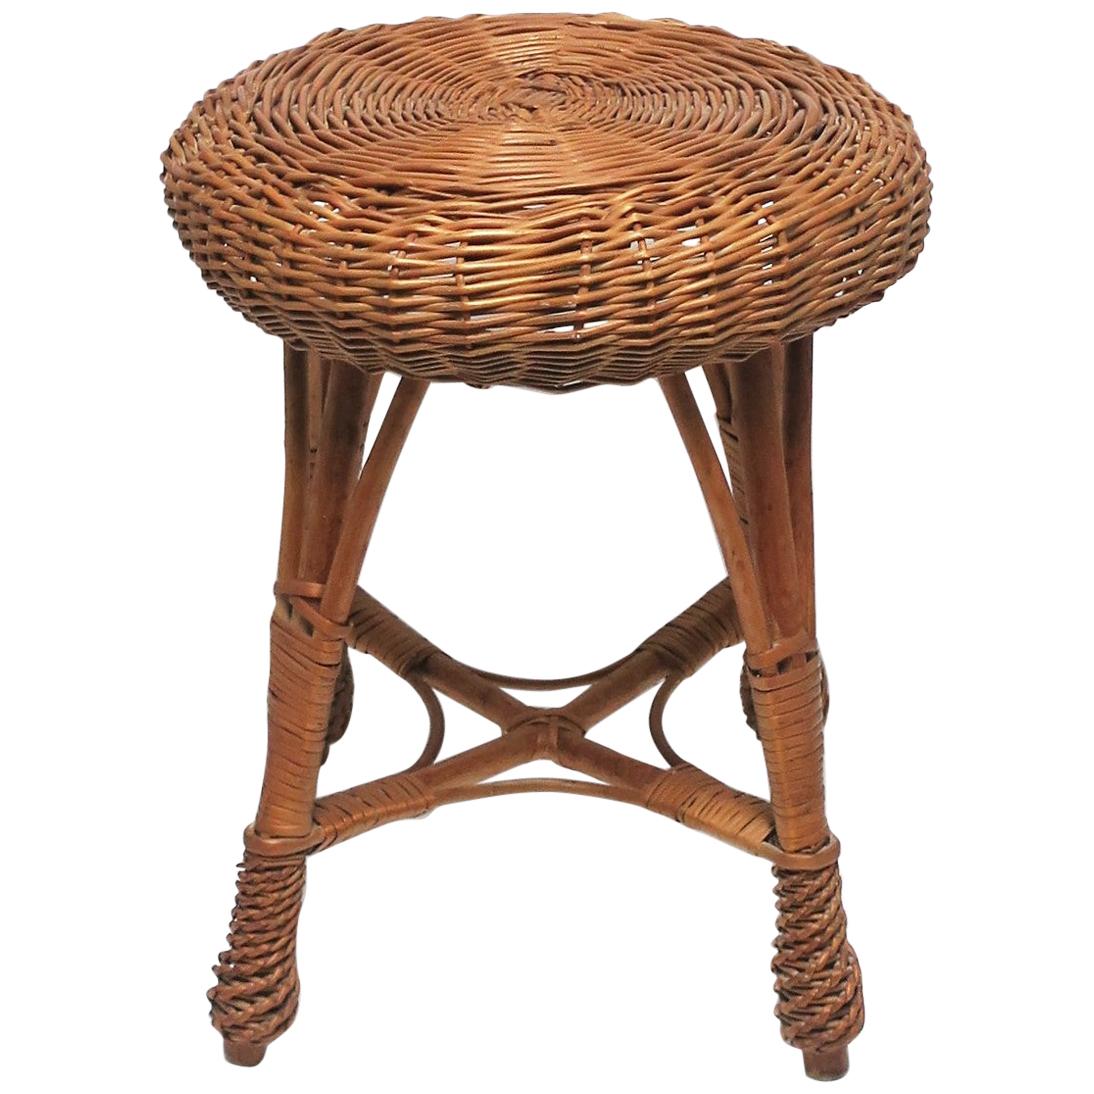 Wicker Rattan and Wood Stool